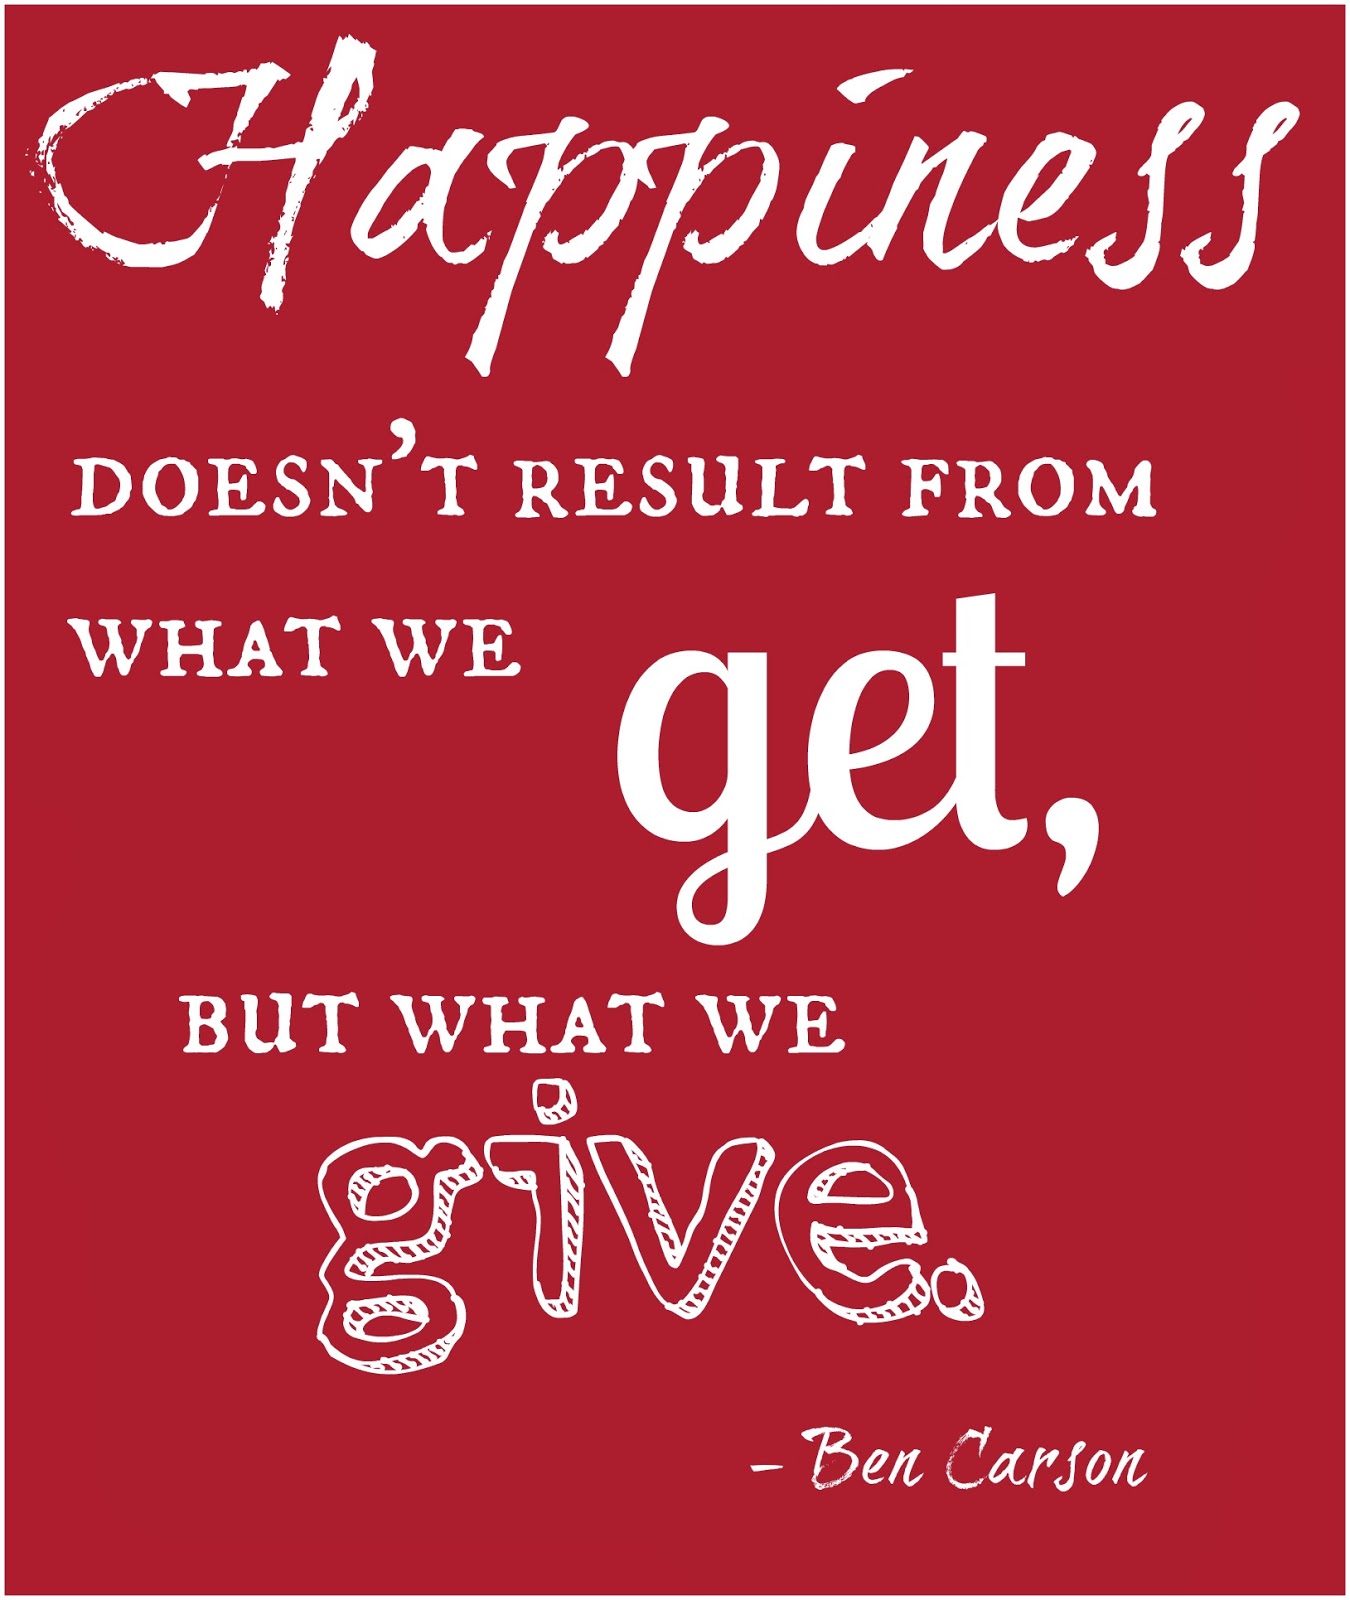 Short Christmas Quotes About Giving ~ Xmas Stuff For > Christmas ...